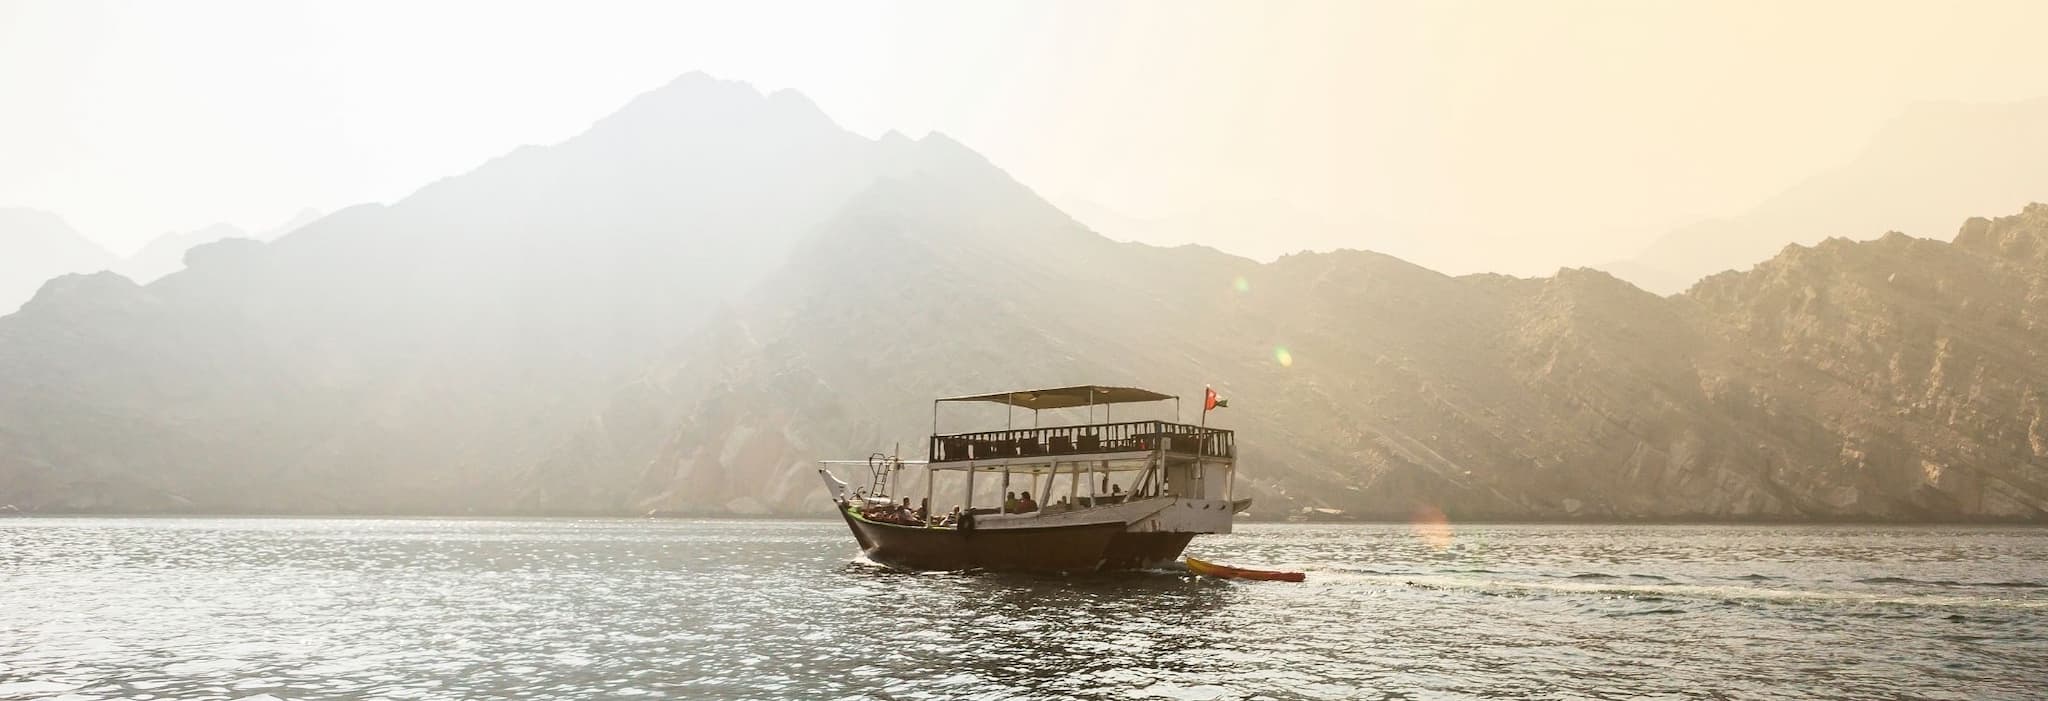 10 reasons why you'll want to take that Musandam trip right away